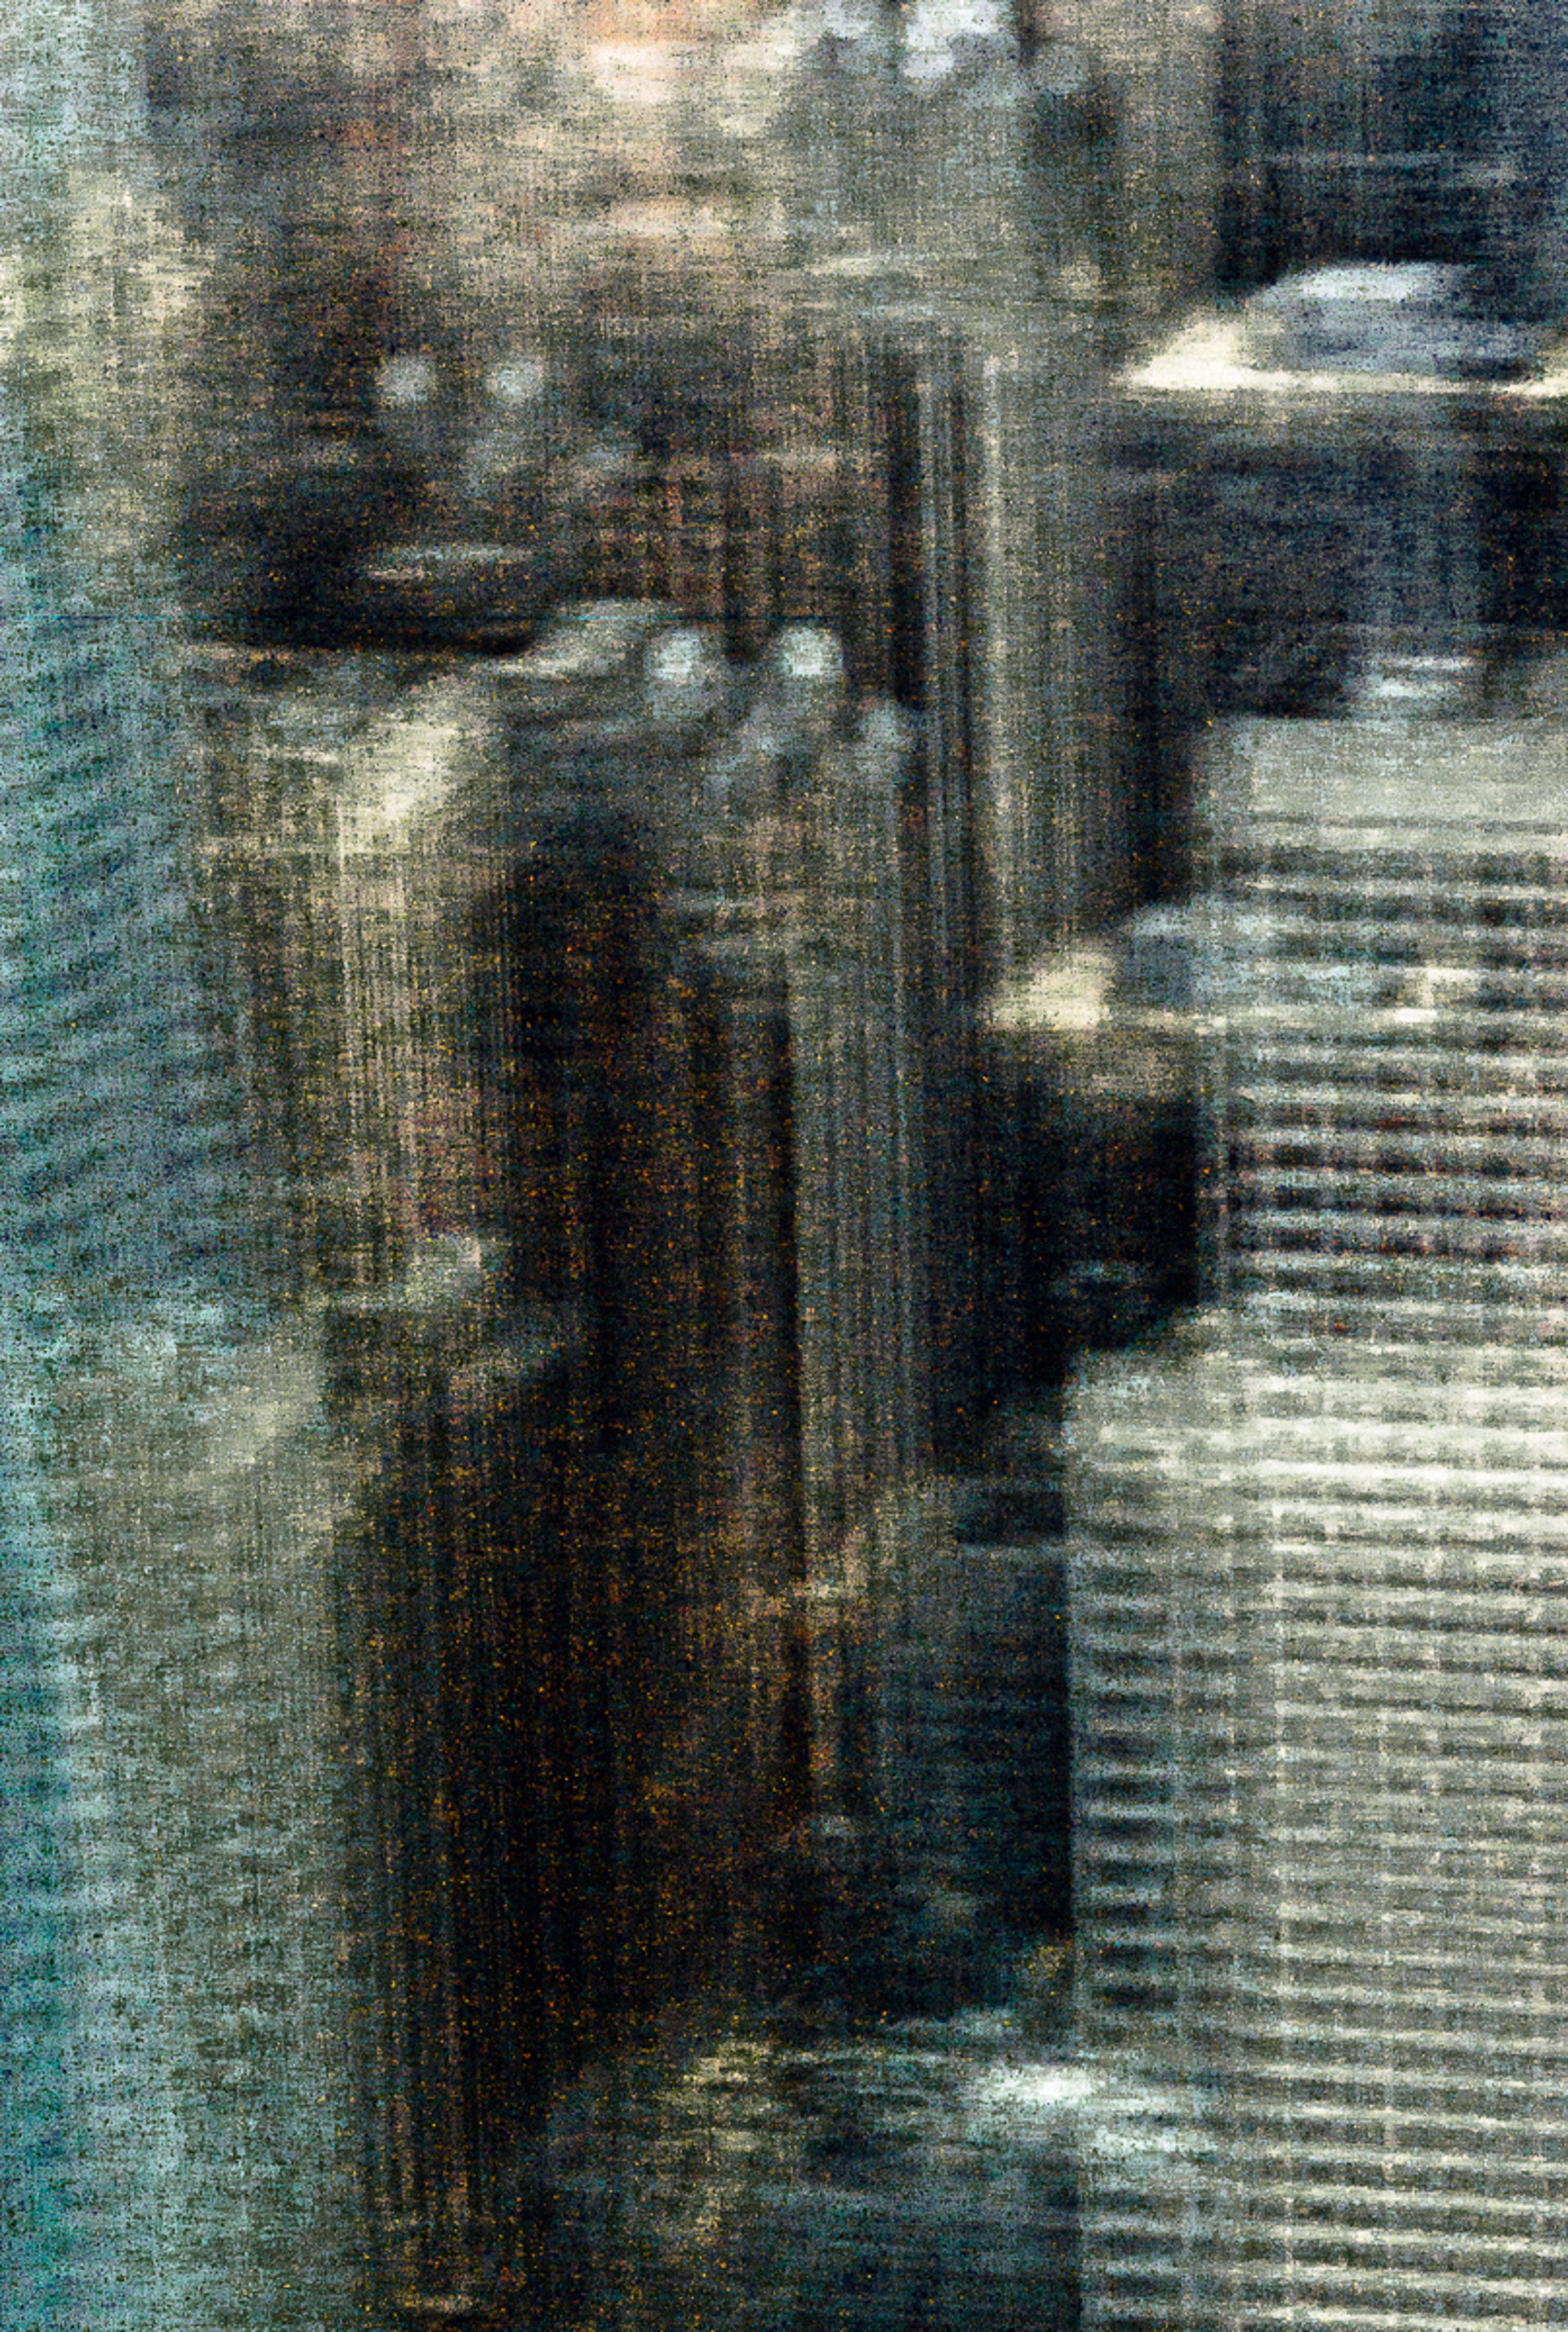 Cityscape number L1061117 - Urban Canyons by Sol Hill